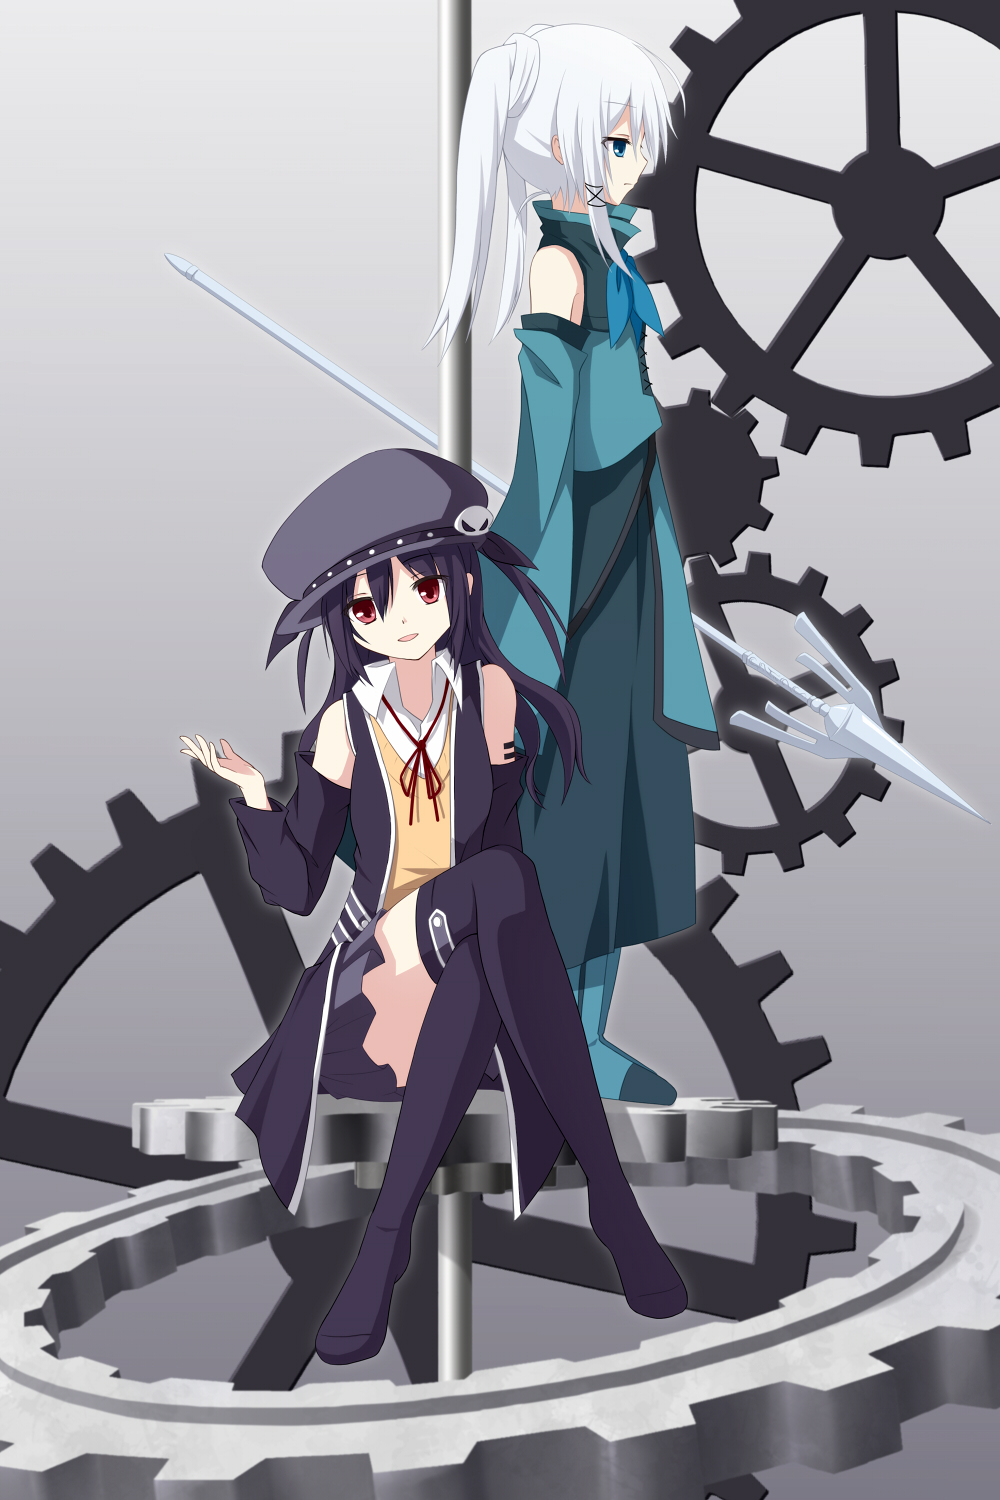 2girls 3: :d black_hair blue_eyes ciel_sacred gears hat hayano_hikari highres holding long_hair looking_at_viewer multiple_girls open_mouth pixiv_fantasia pixiv_fantasia_5 polearm red_eyes sitting smile spear standing tagme thigh-highs twintails weapon white_hair zettai_ryouiki